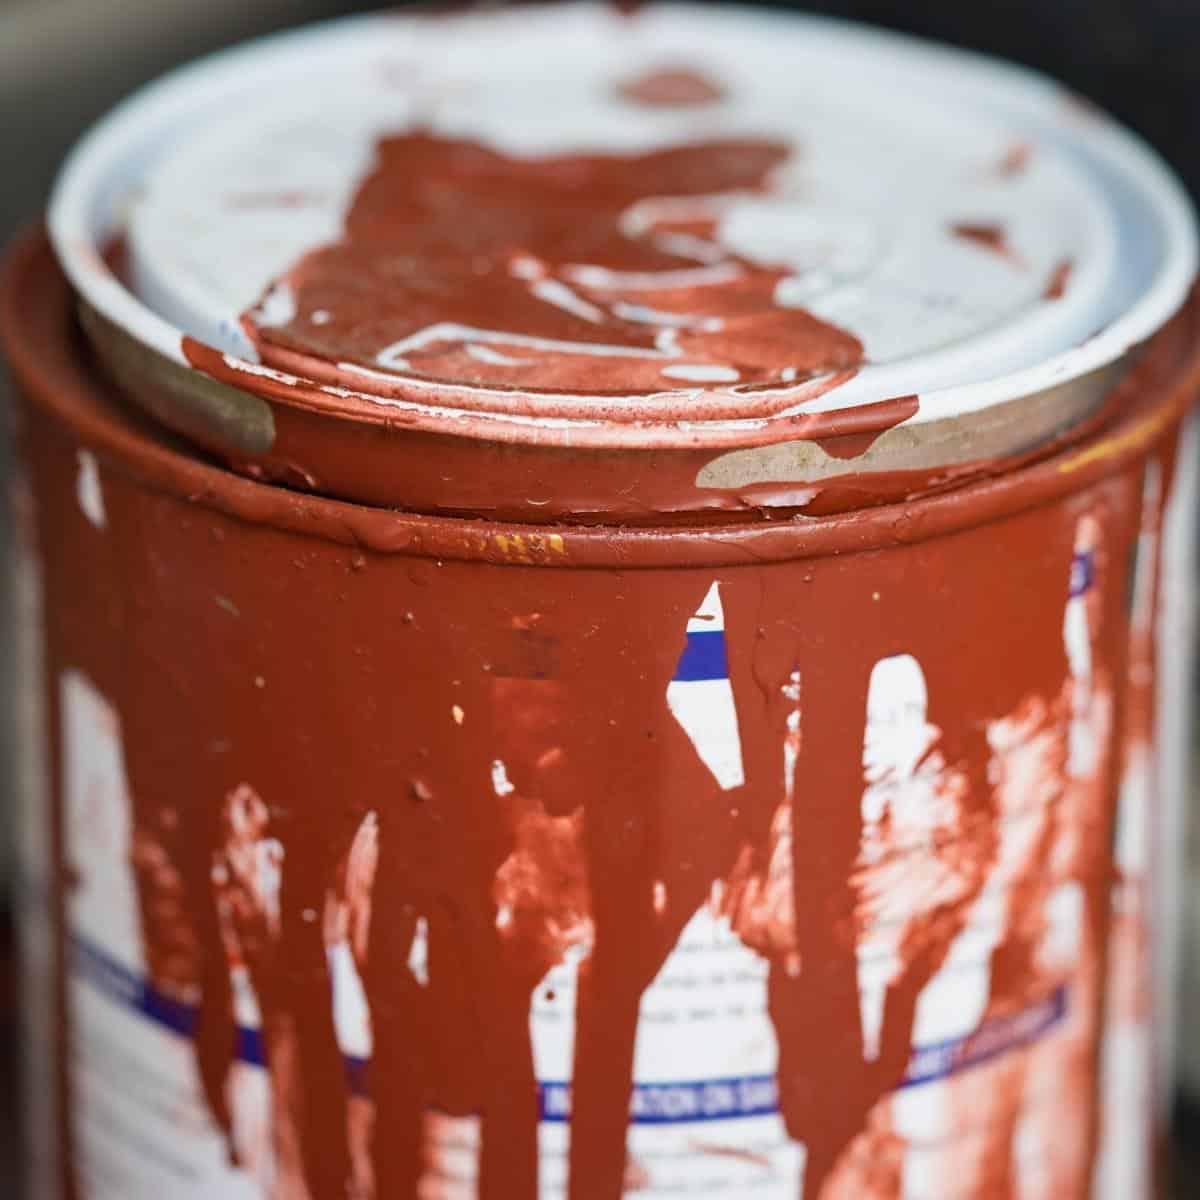 paint can with drips on lid and sides